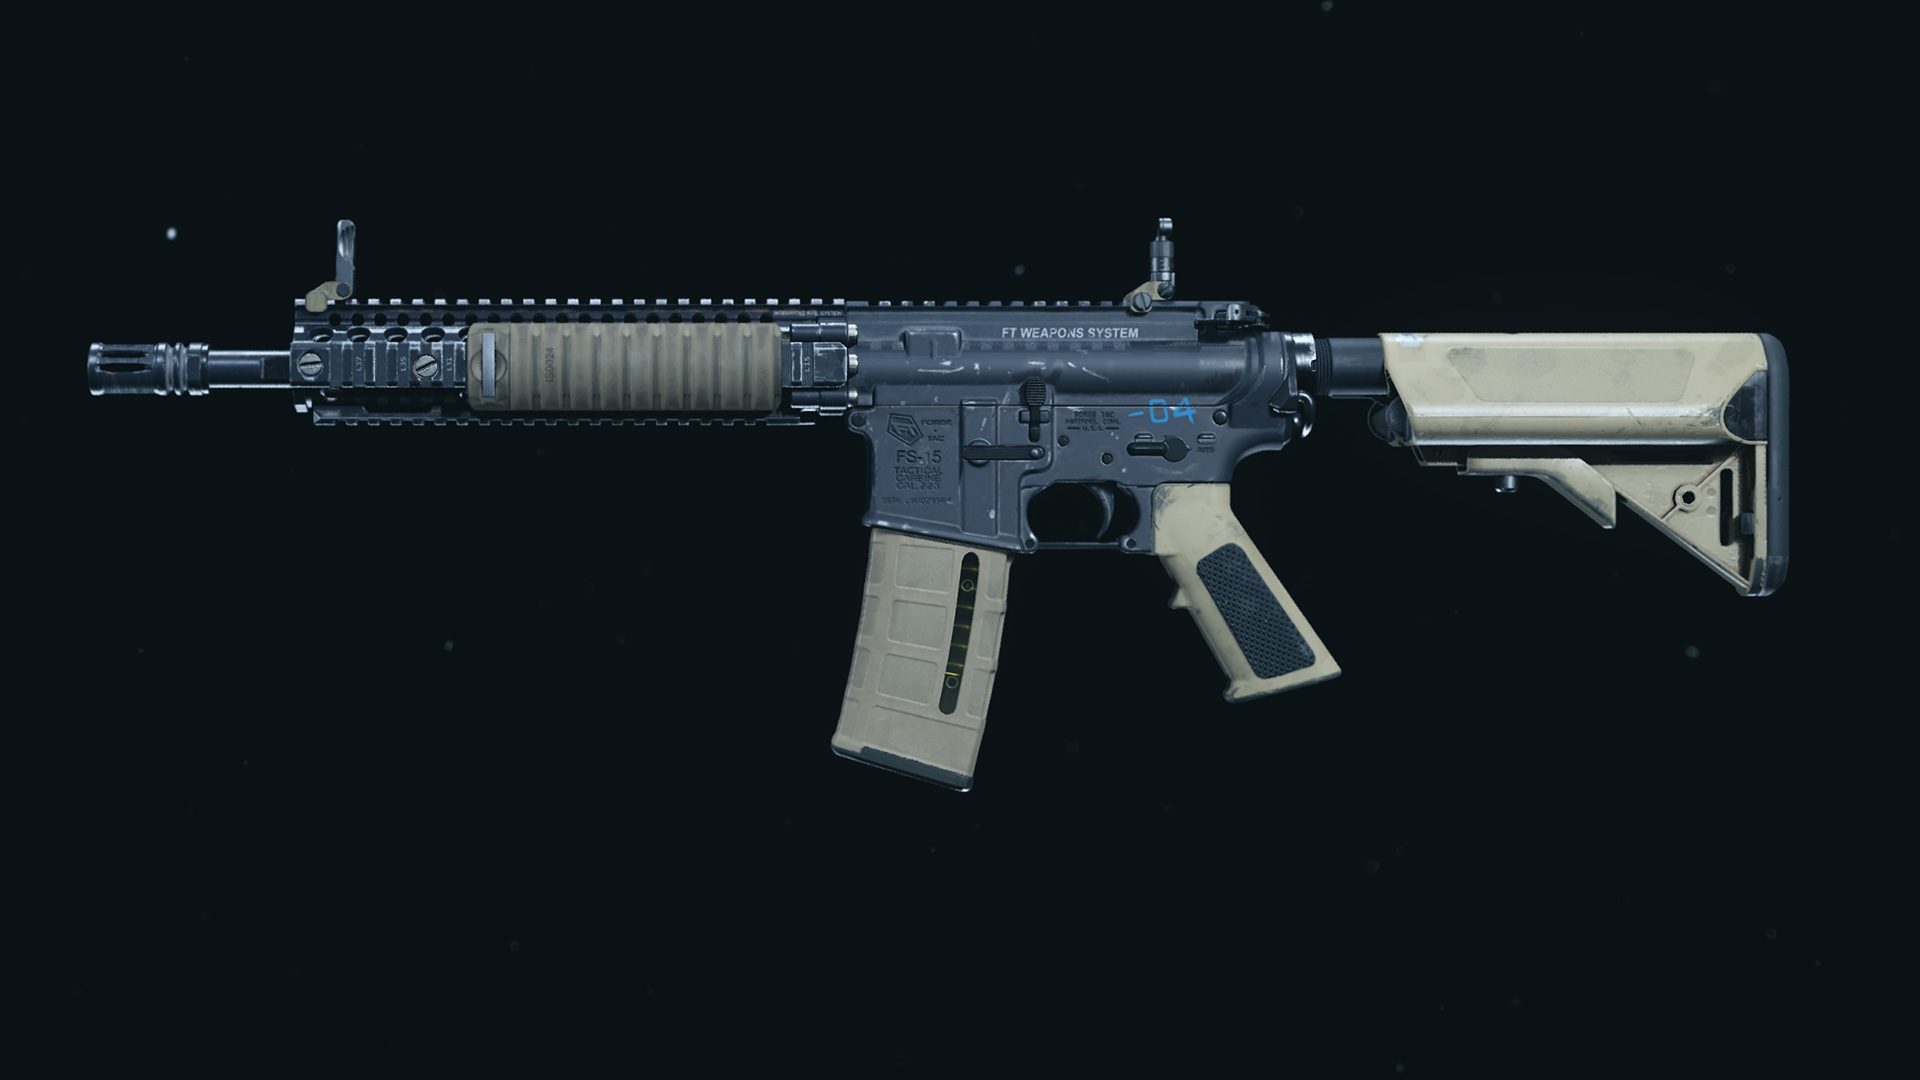 Cyber security m4a4 bs фото 63